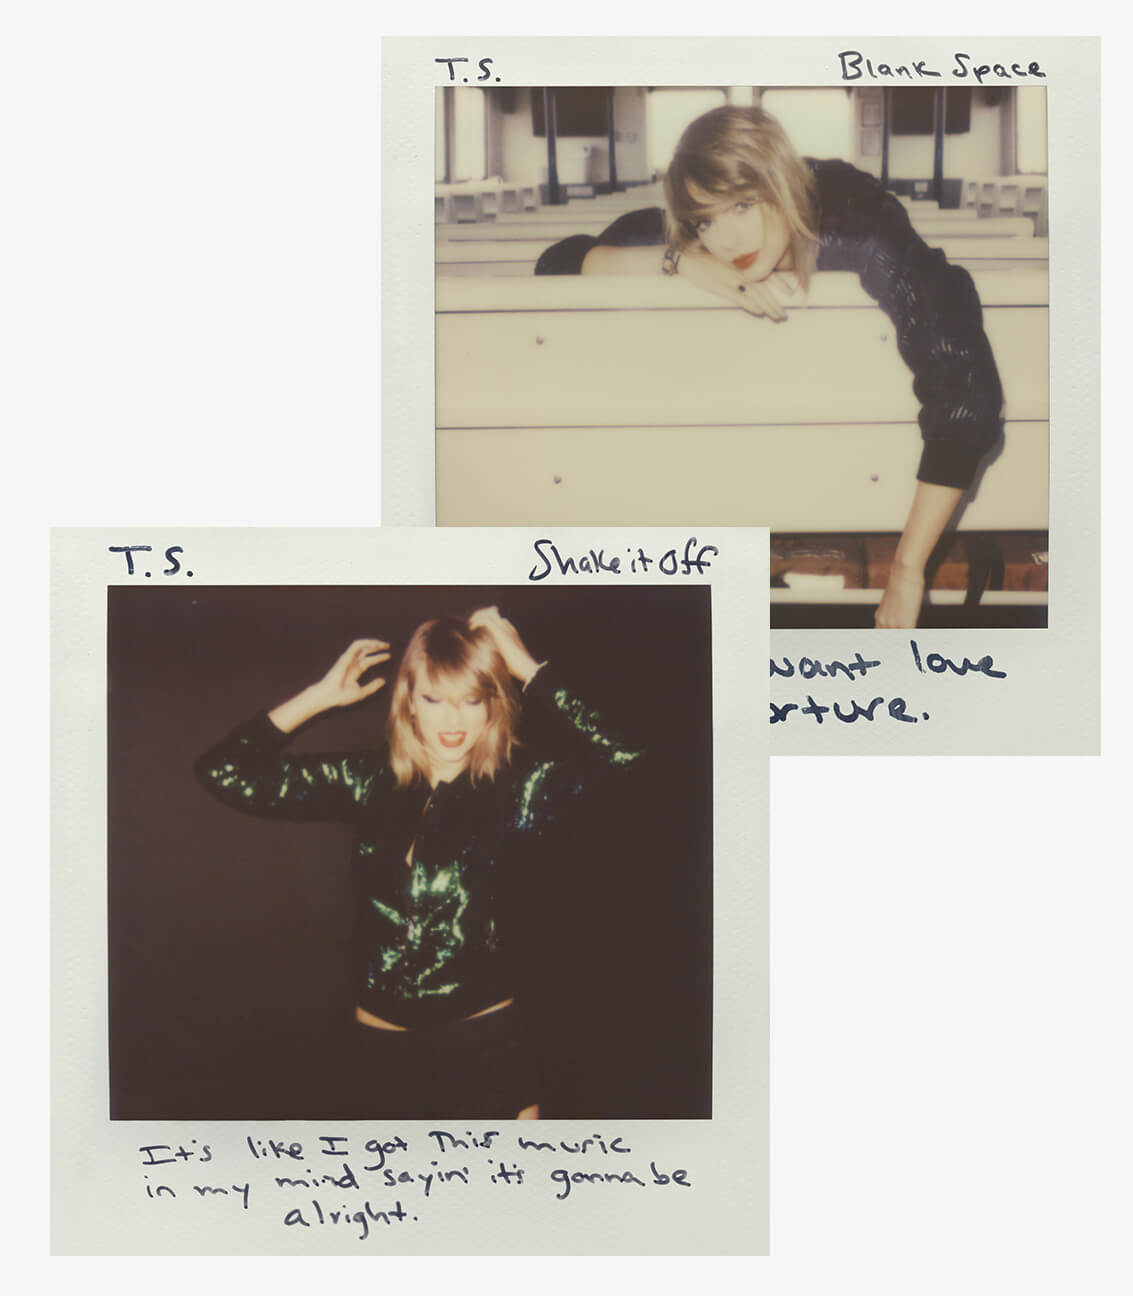 Single artwork for Blank Space and Shake It Off with visual consistency Taylor Swift 1989 album